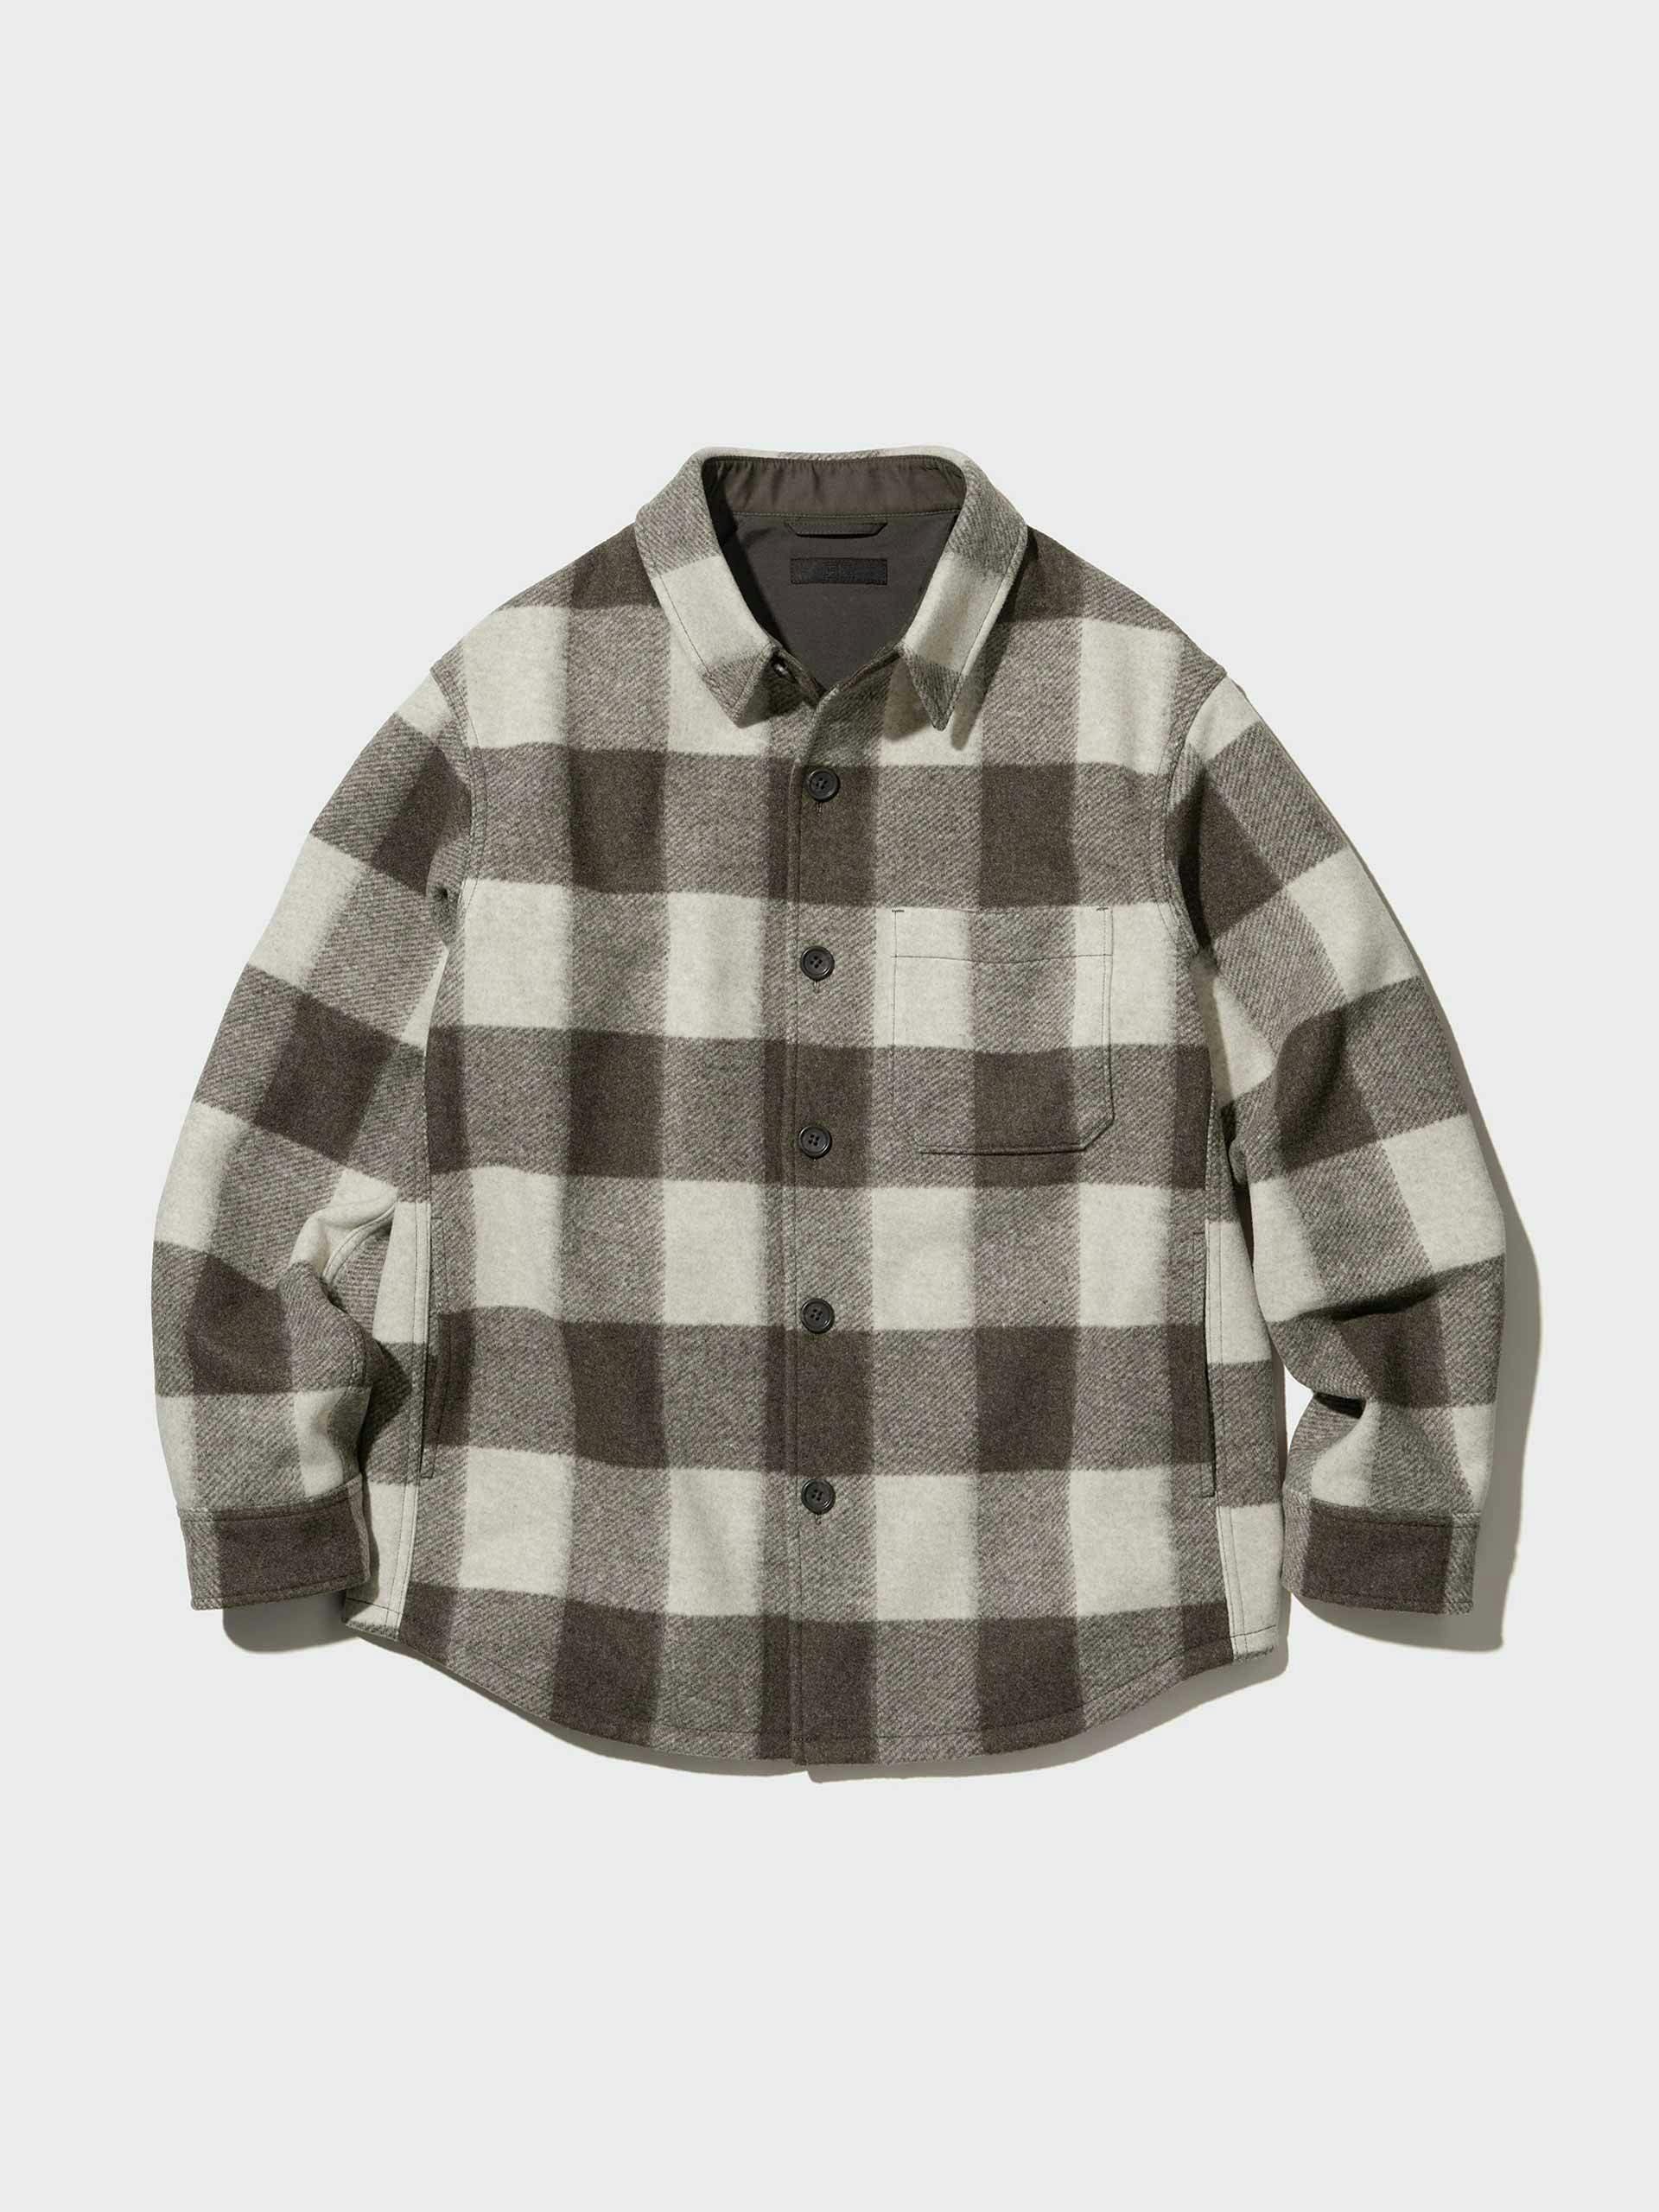 Overshirt jacket in brown check